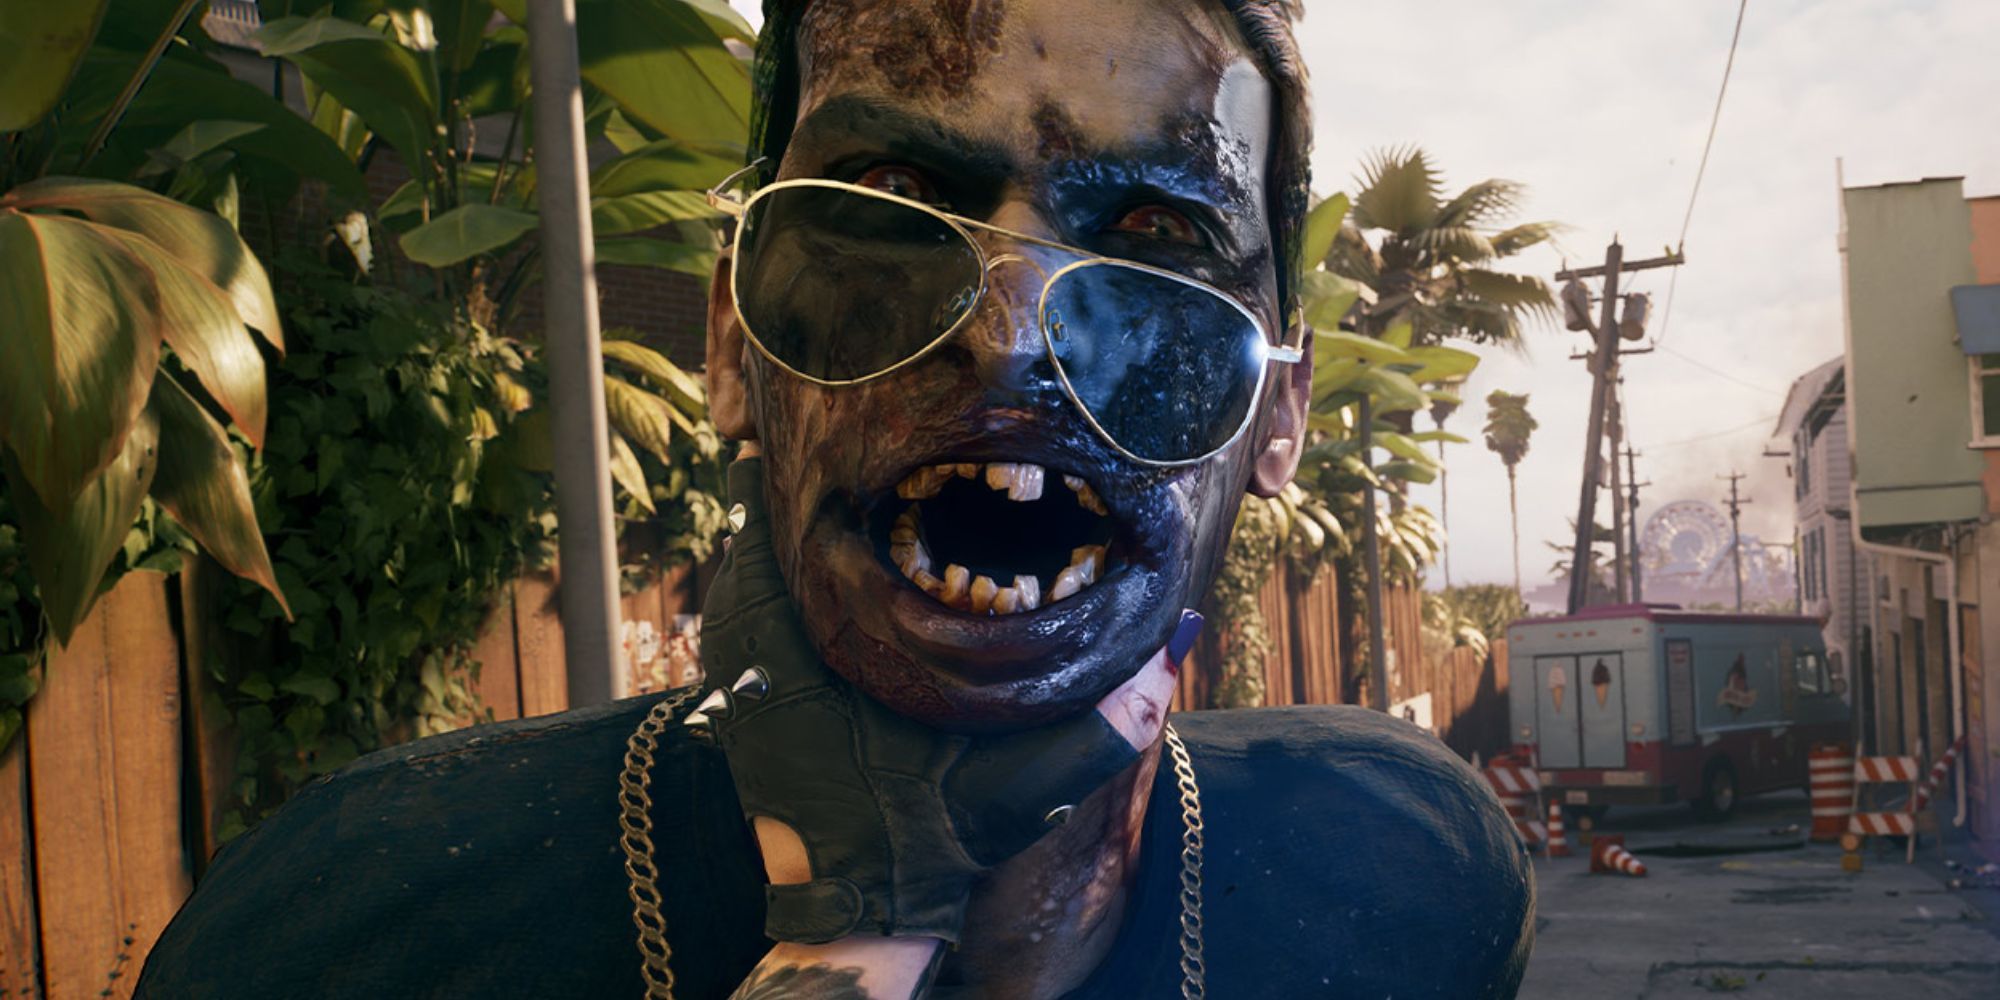 dead island 2 sunglass zombie in the palyers face being held off